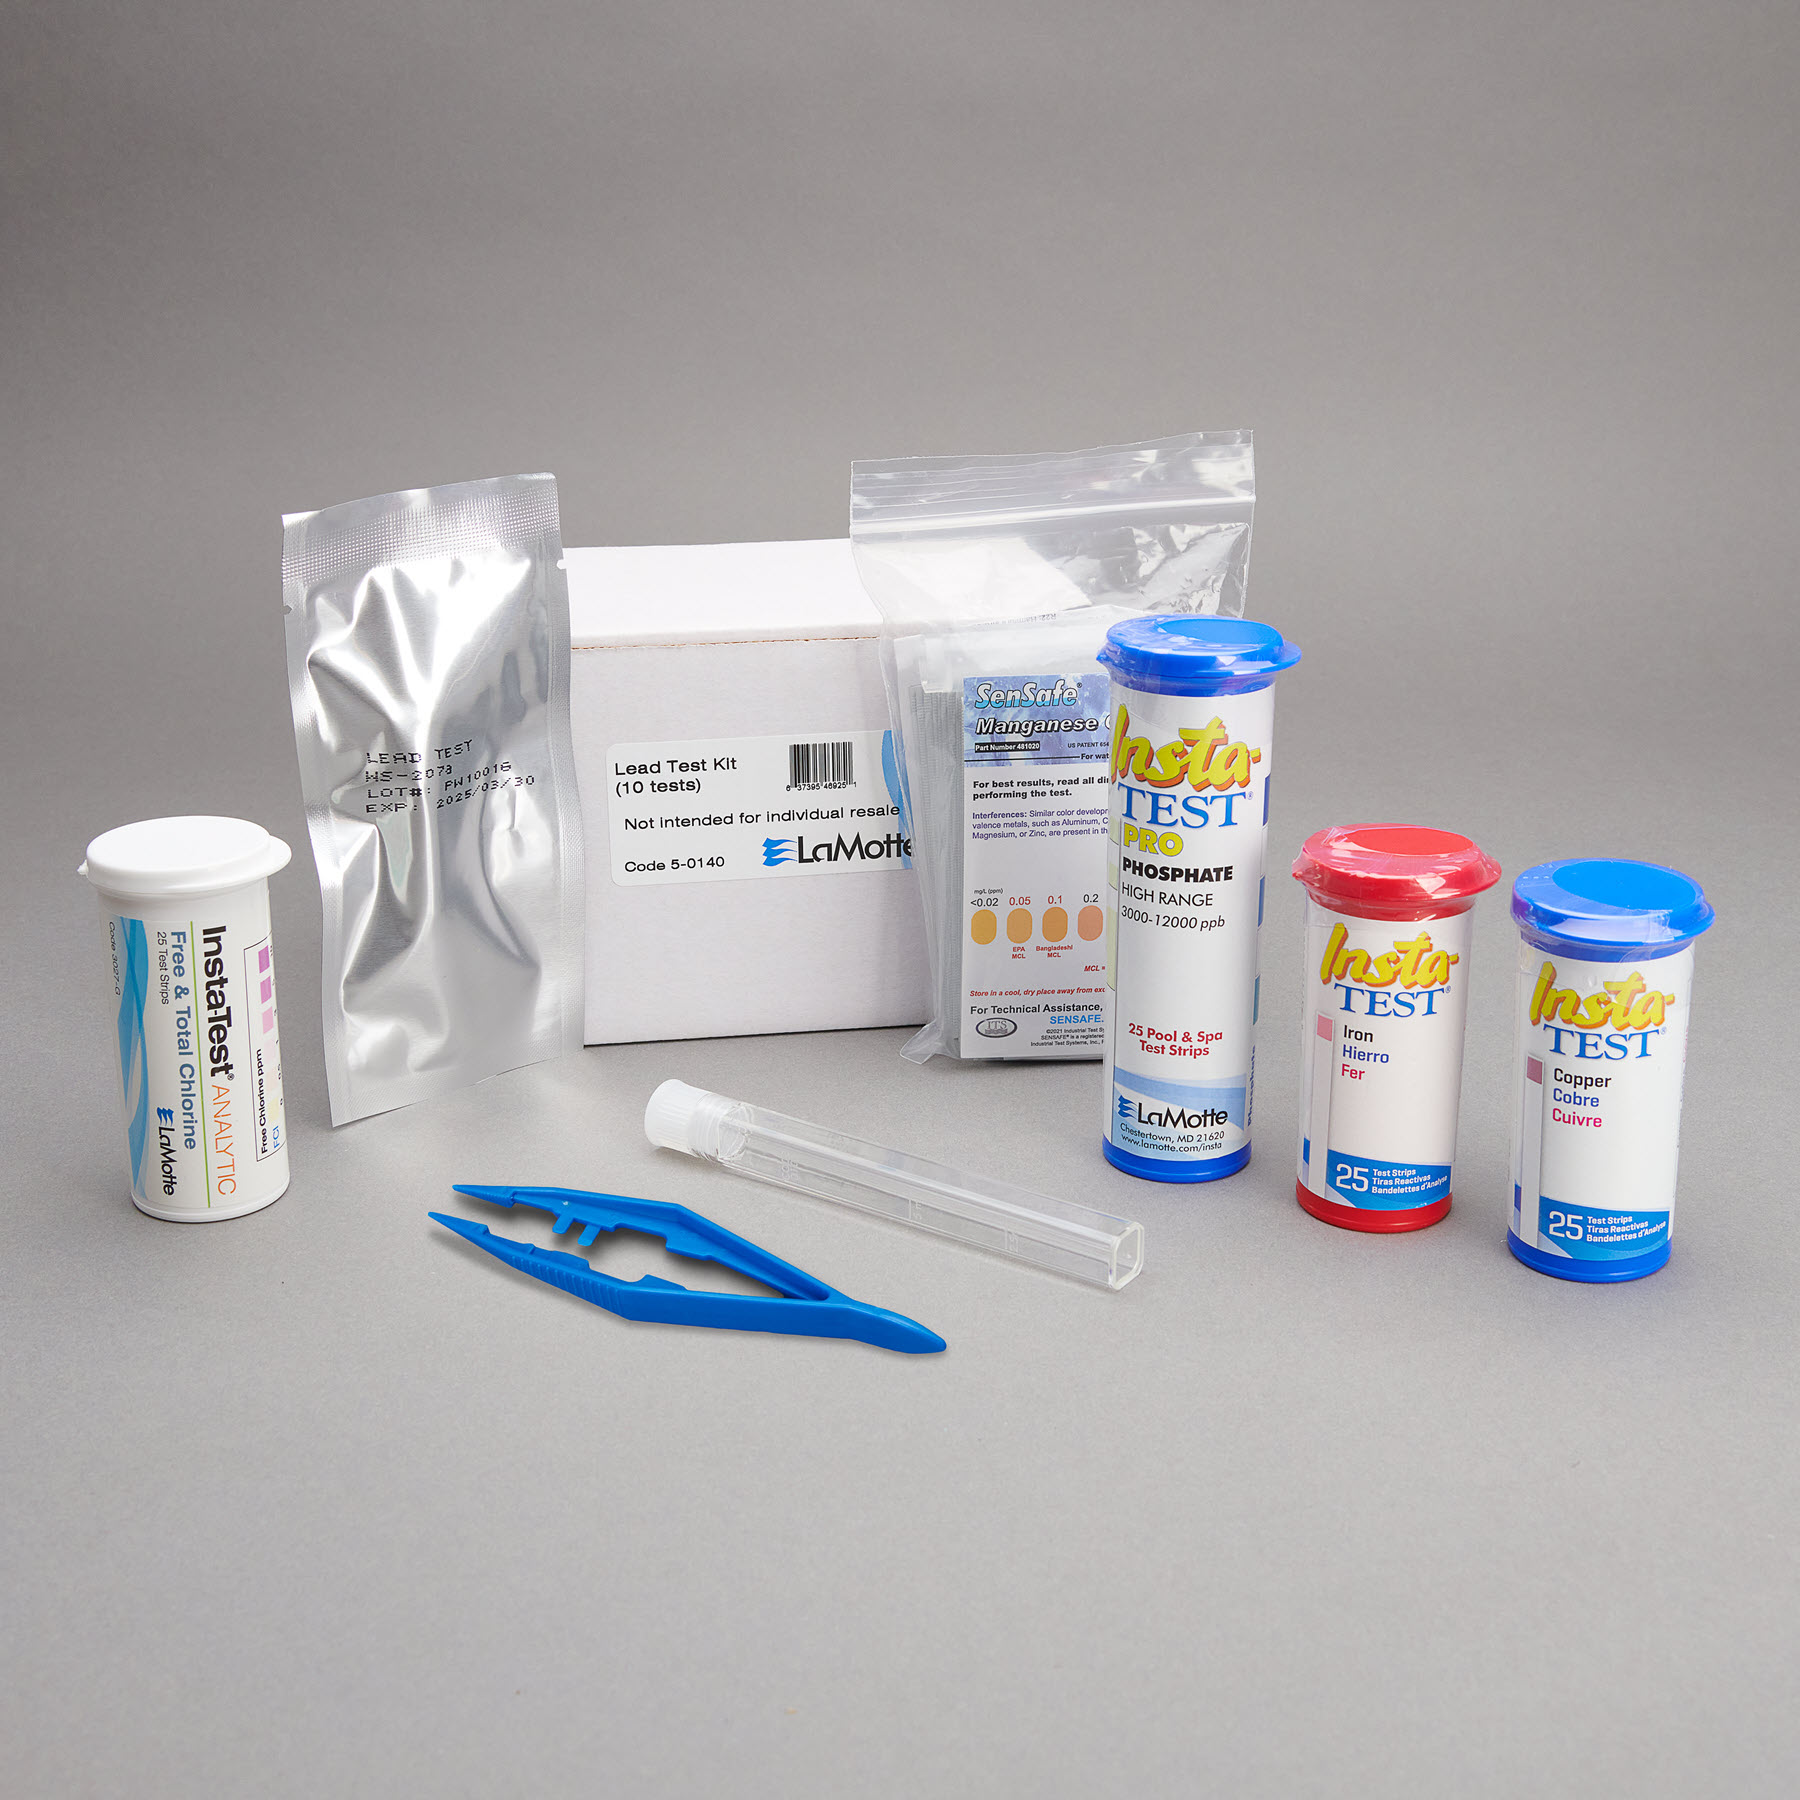 Tests and supplies included in Aquagenx Test Strip Pack